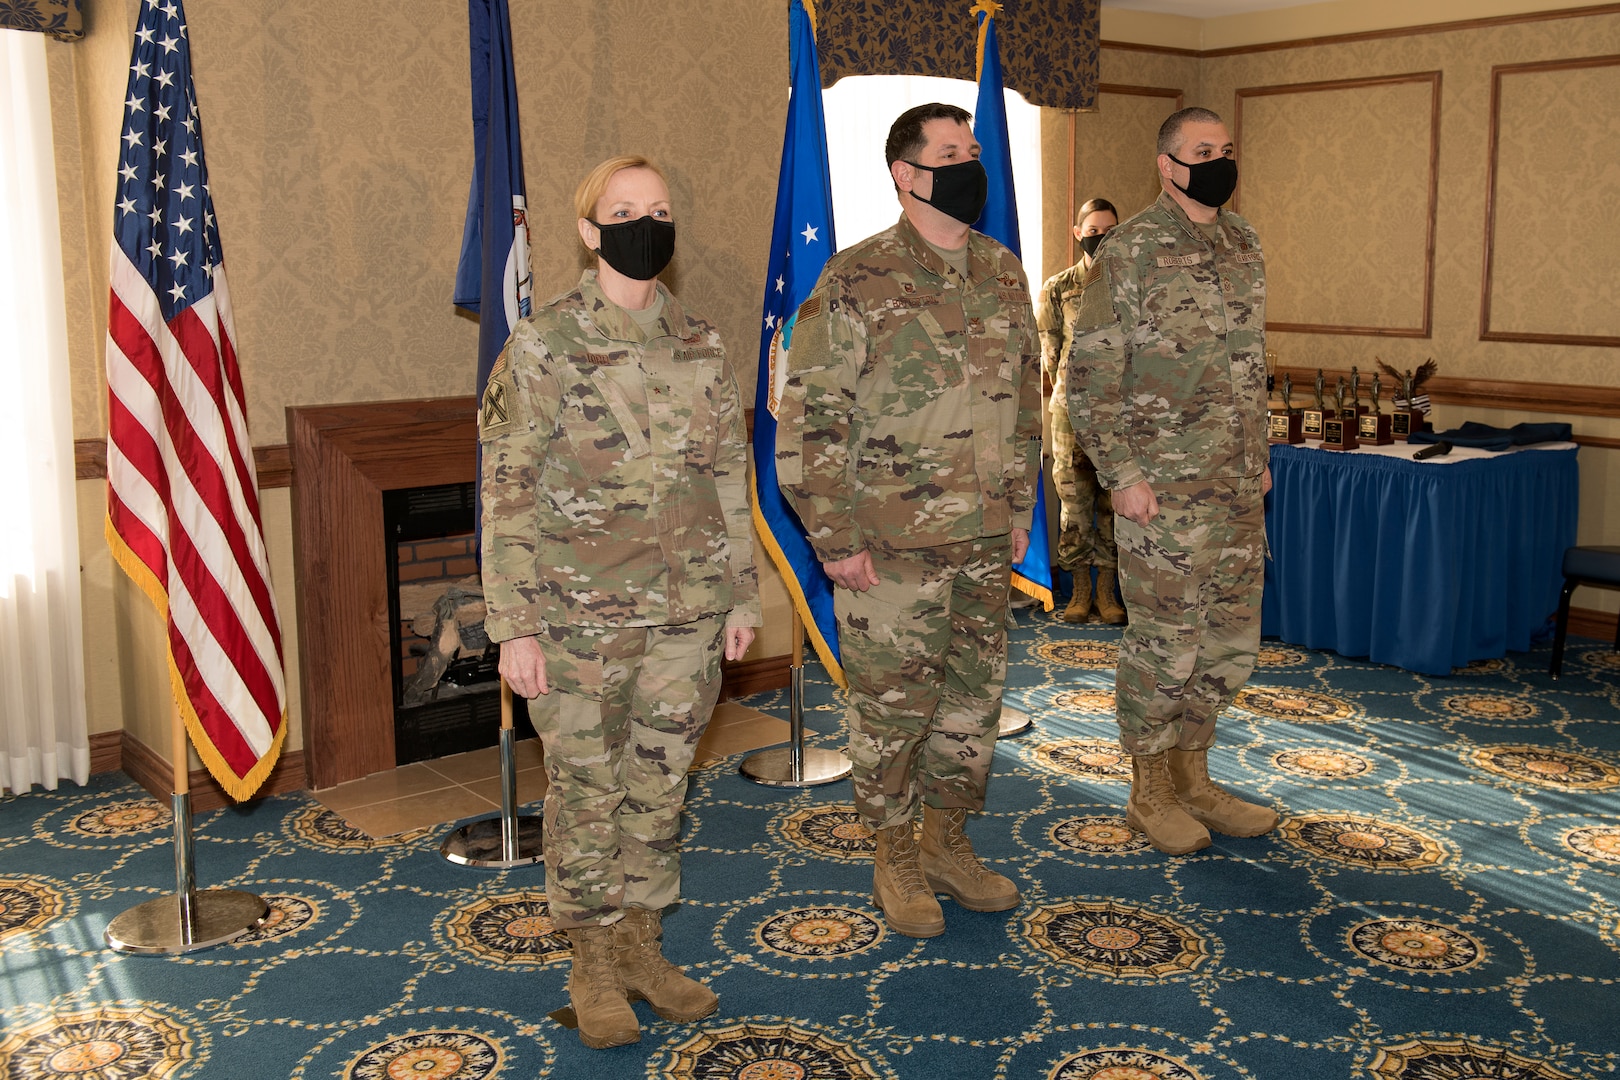 Military leaders stand at attention during a ceremony